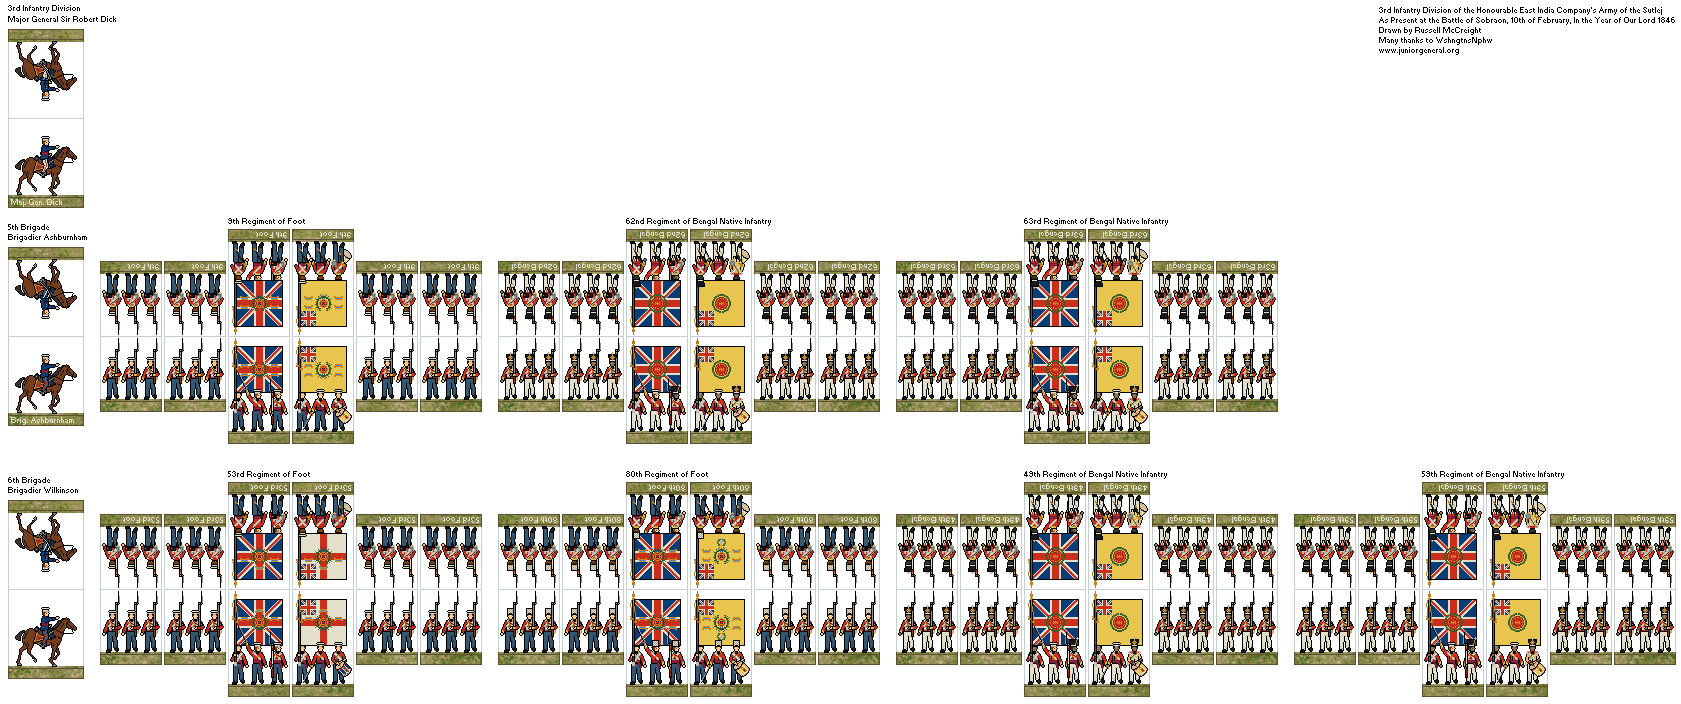 Army of the Sutlej 3rd Division (Micro-Scale)